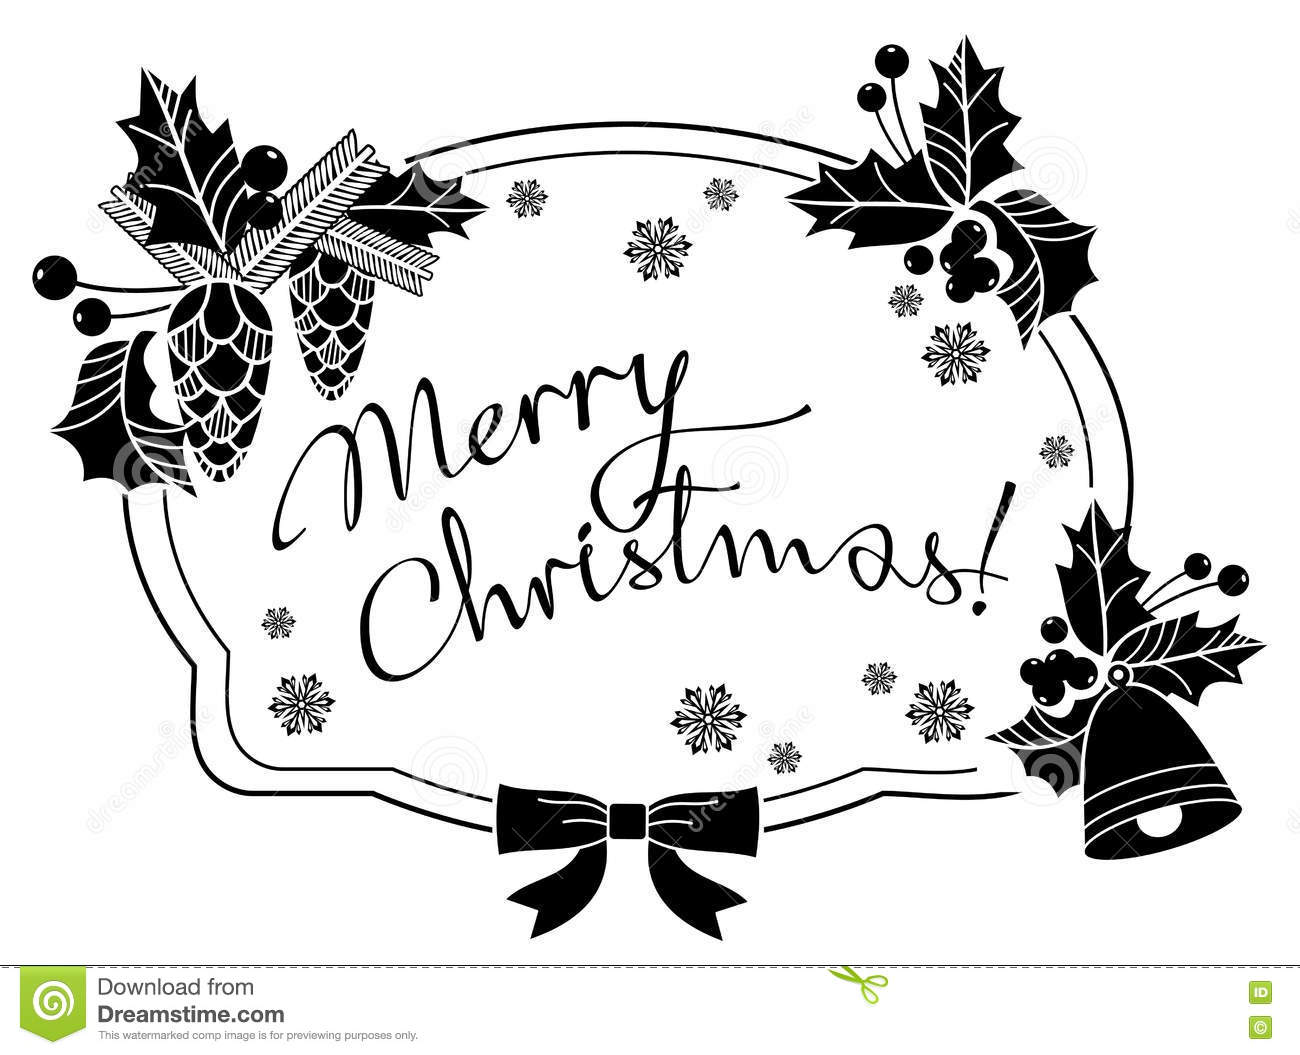 Christmas Label With Written Greeting Merry Christmas.